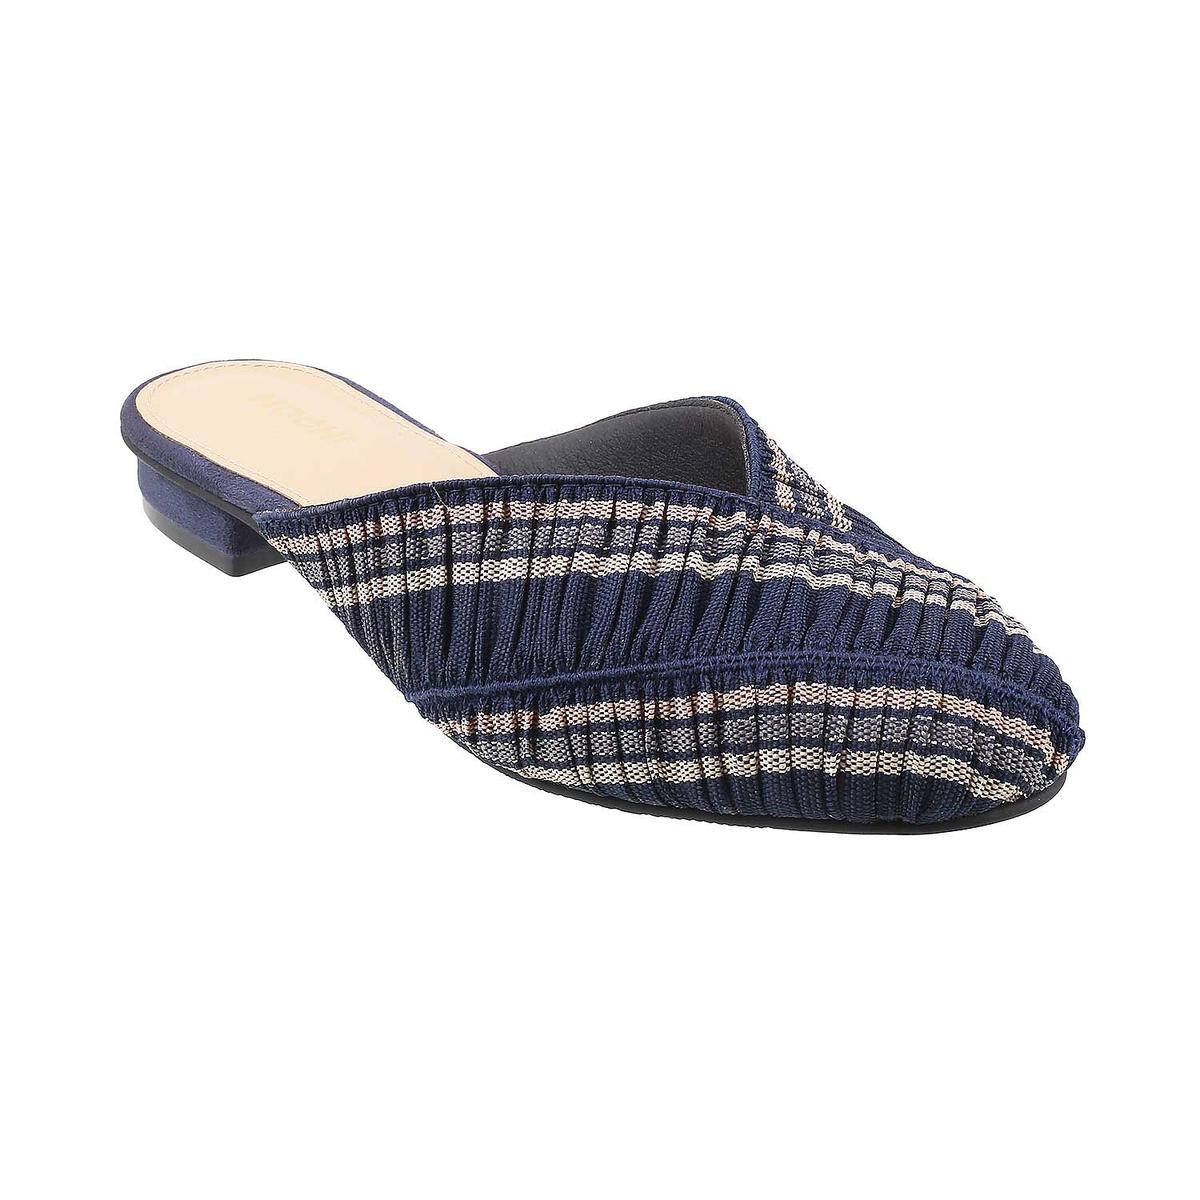 Shoes Womens Shoes Slip Ons Loafers Indian Jutties 